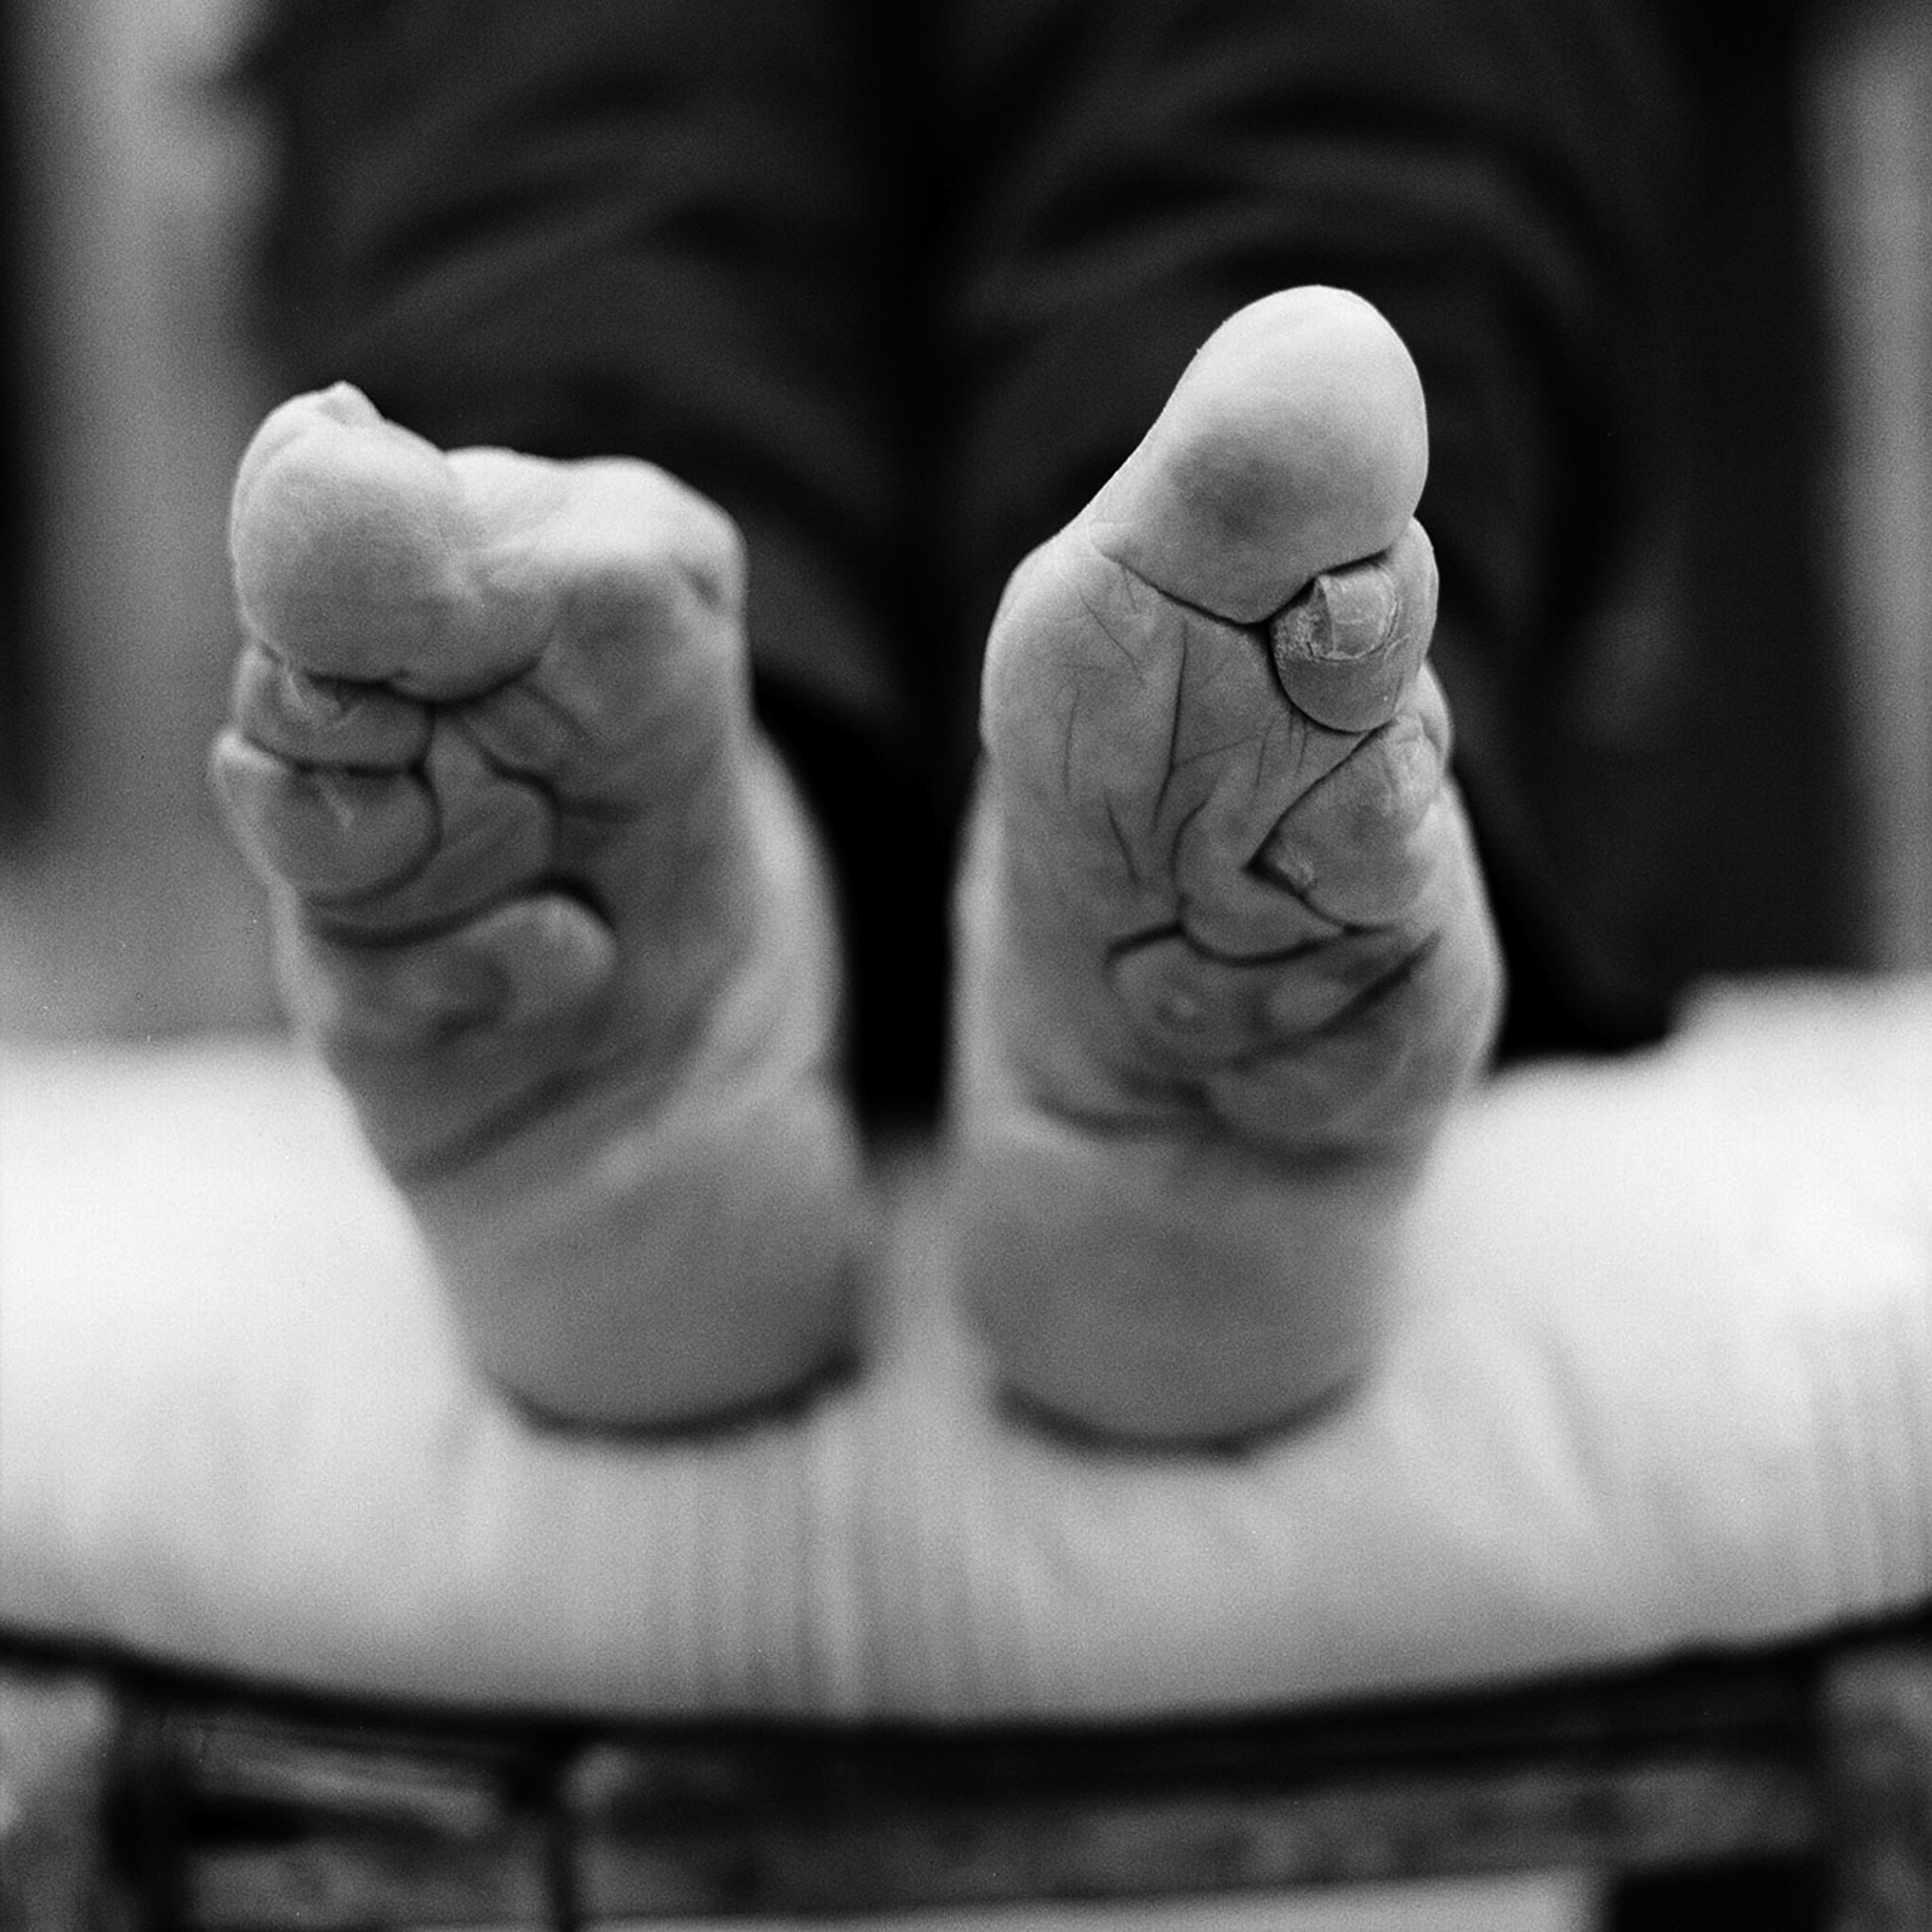 An image from Jo Farrell's upcoming book shows the feet of Yang Jinge, 87. Photo: Jo Farrell